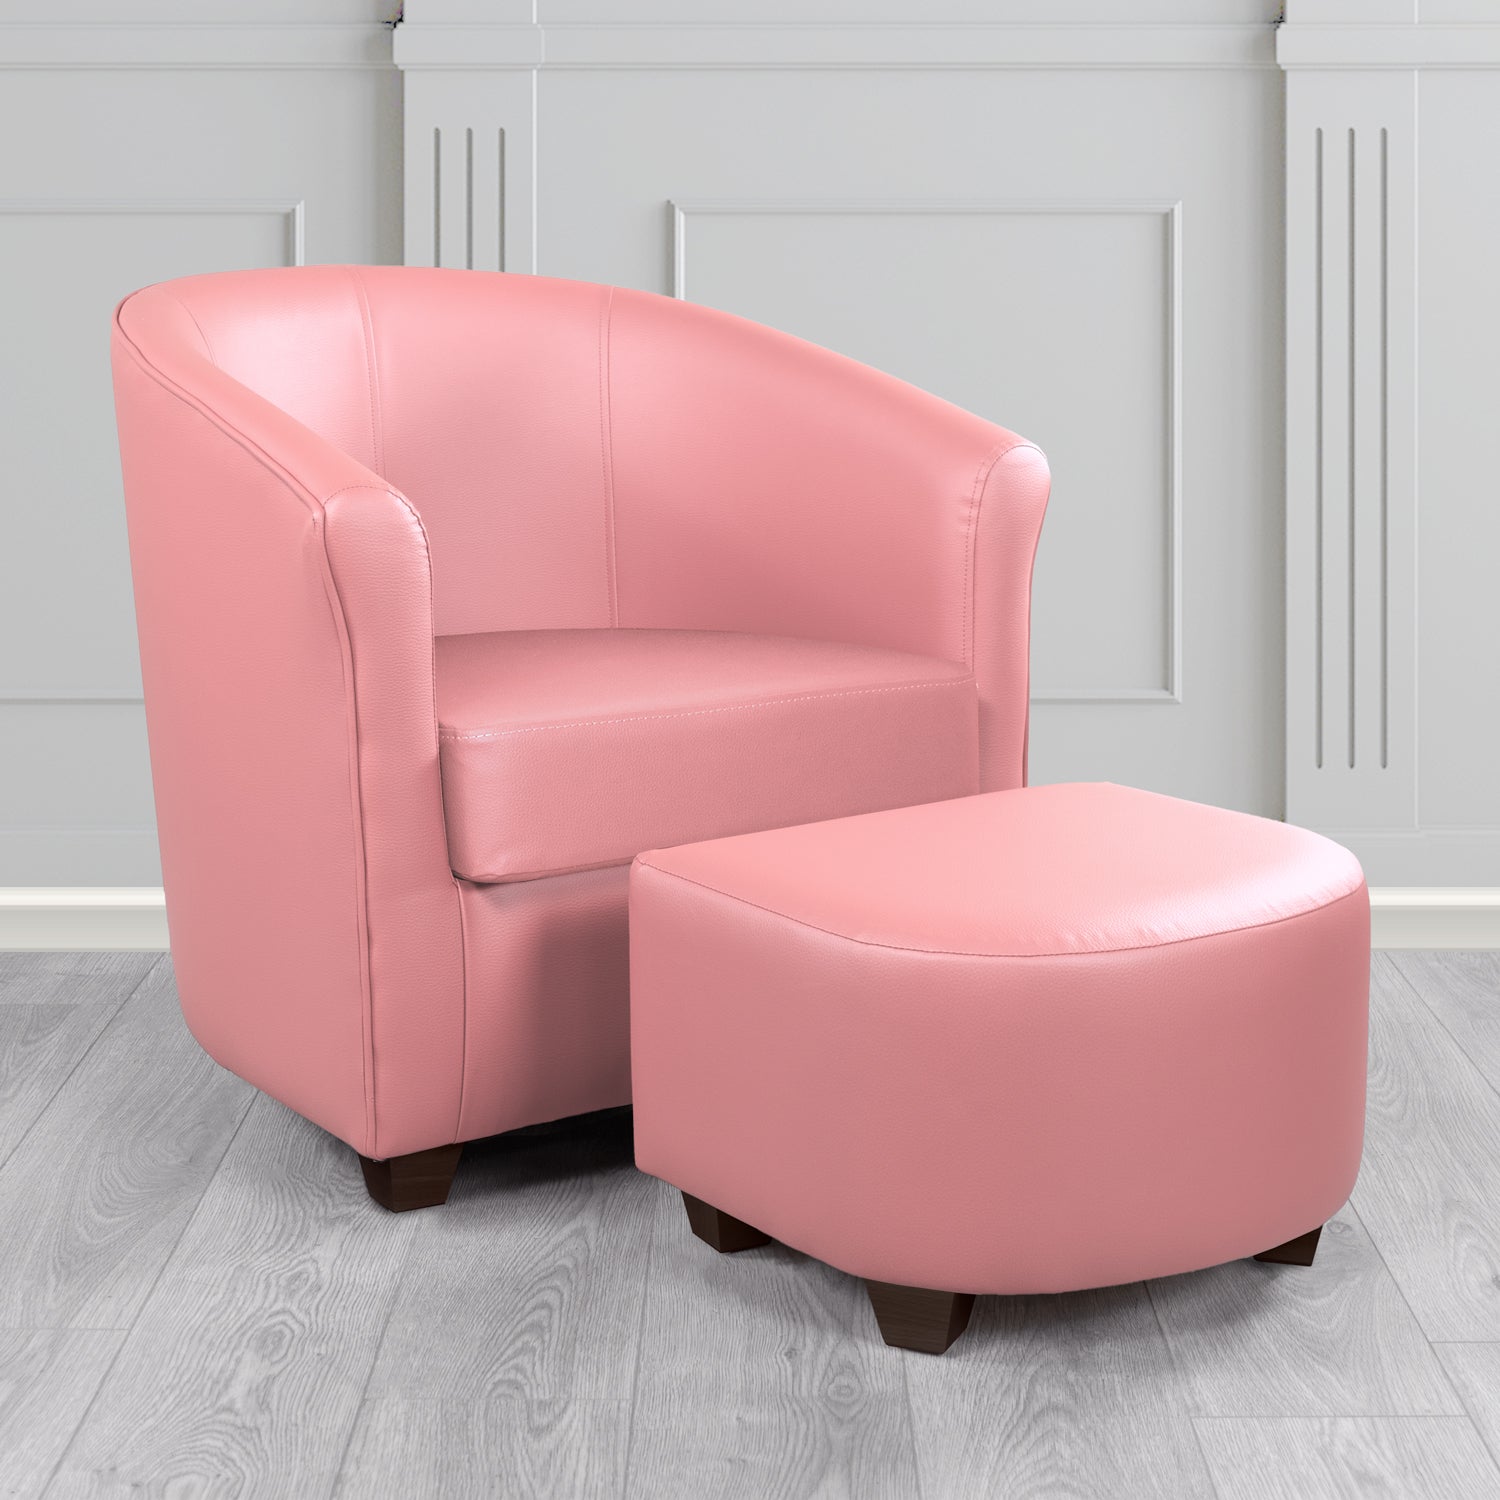 Cannes Tub Chair with Footstool Set in Just Colour Cherry Blossom Crib 5 Faux Leather - The Tub Chair Shop